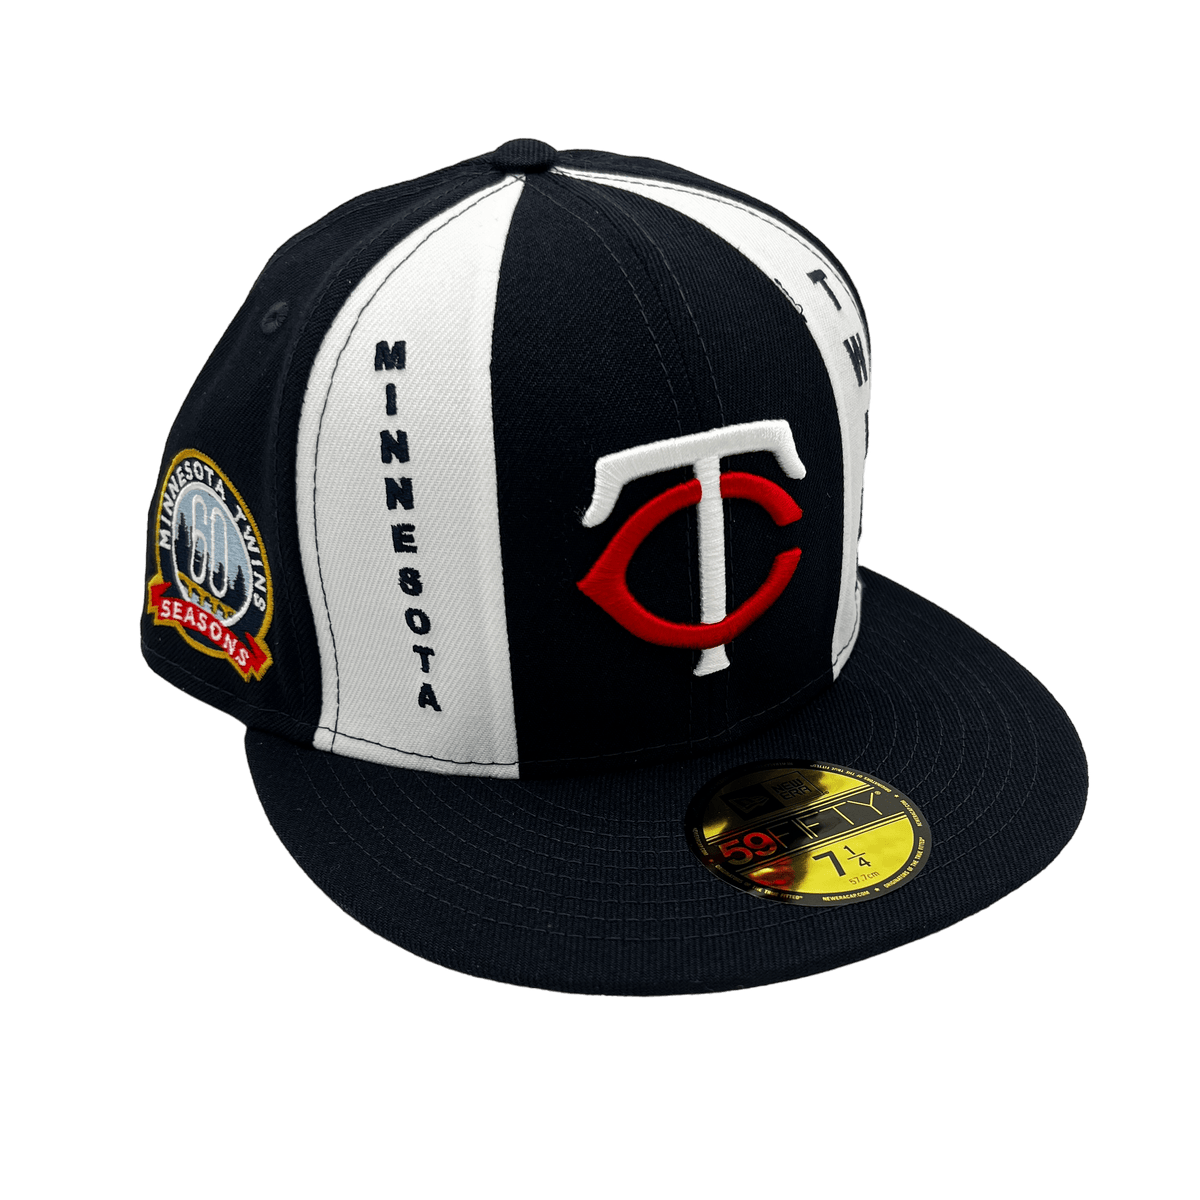 Men’s New Era Minnesota Twins Cooperstown Collection Retro 59FIFTY Fitted  Cap